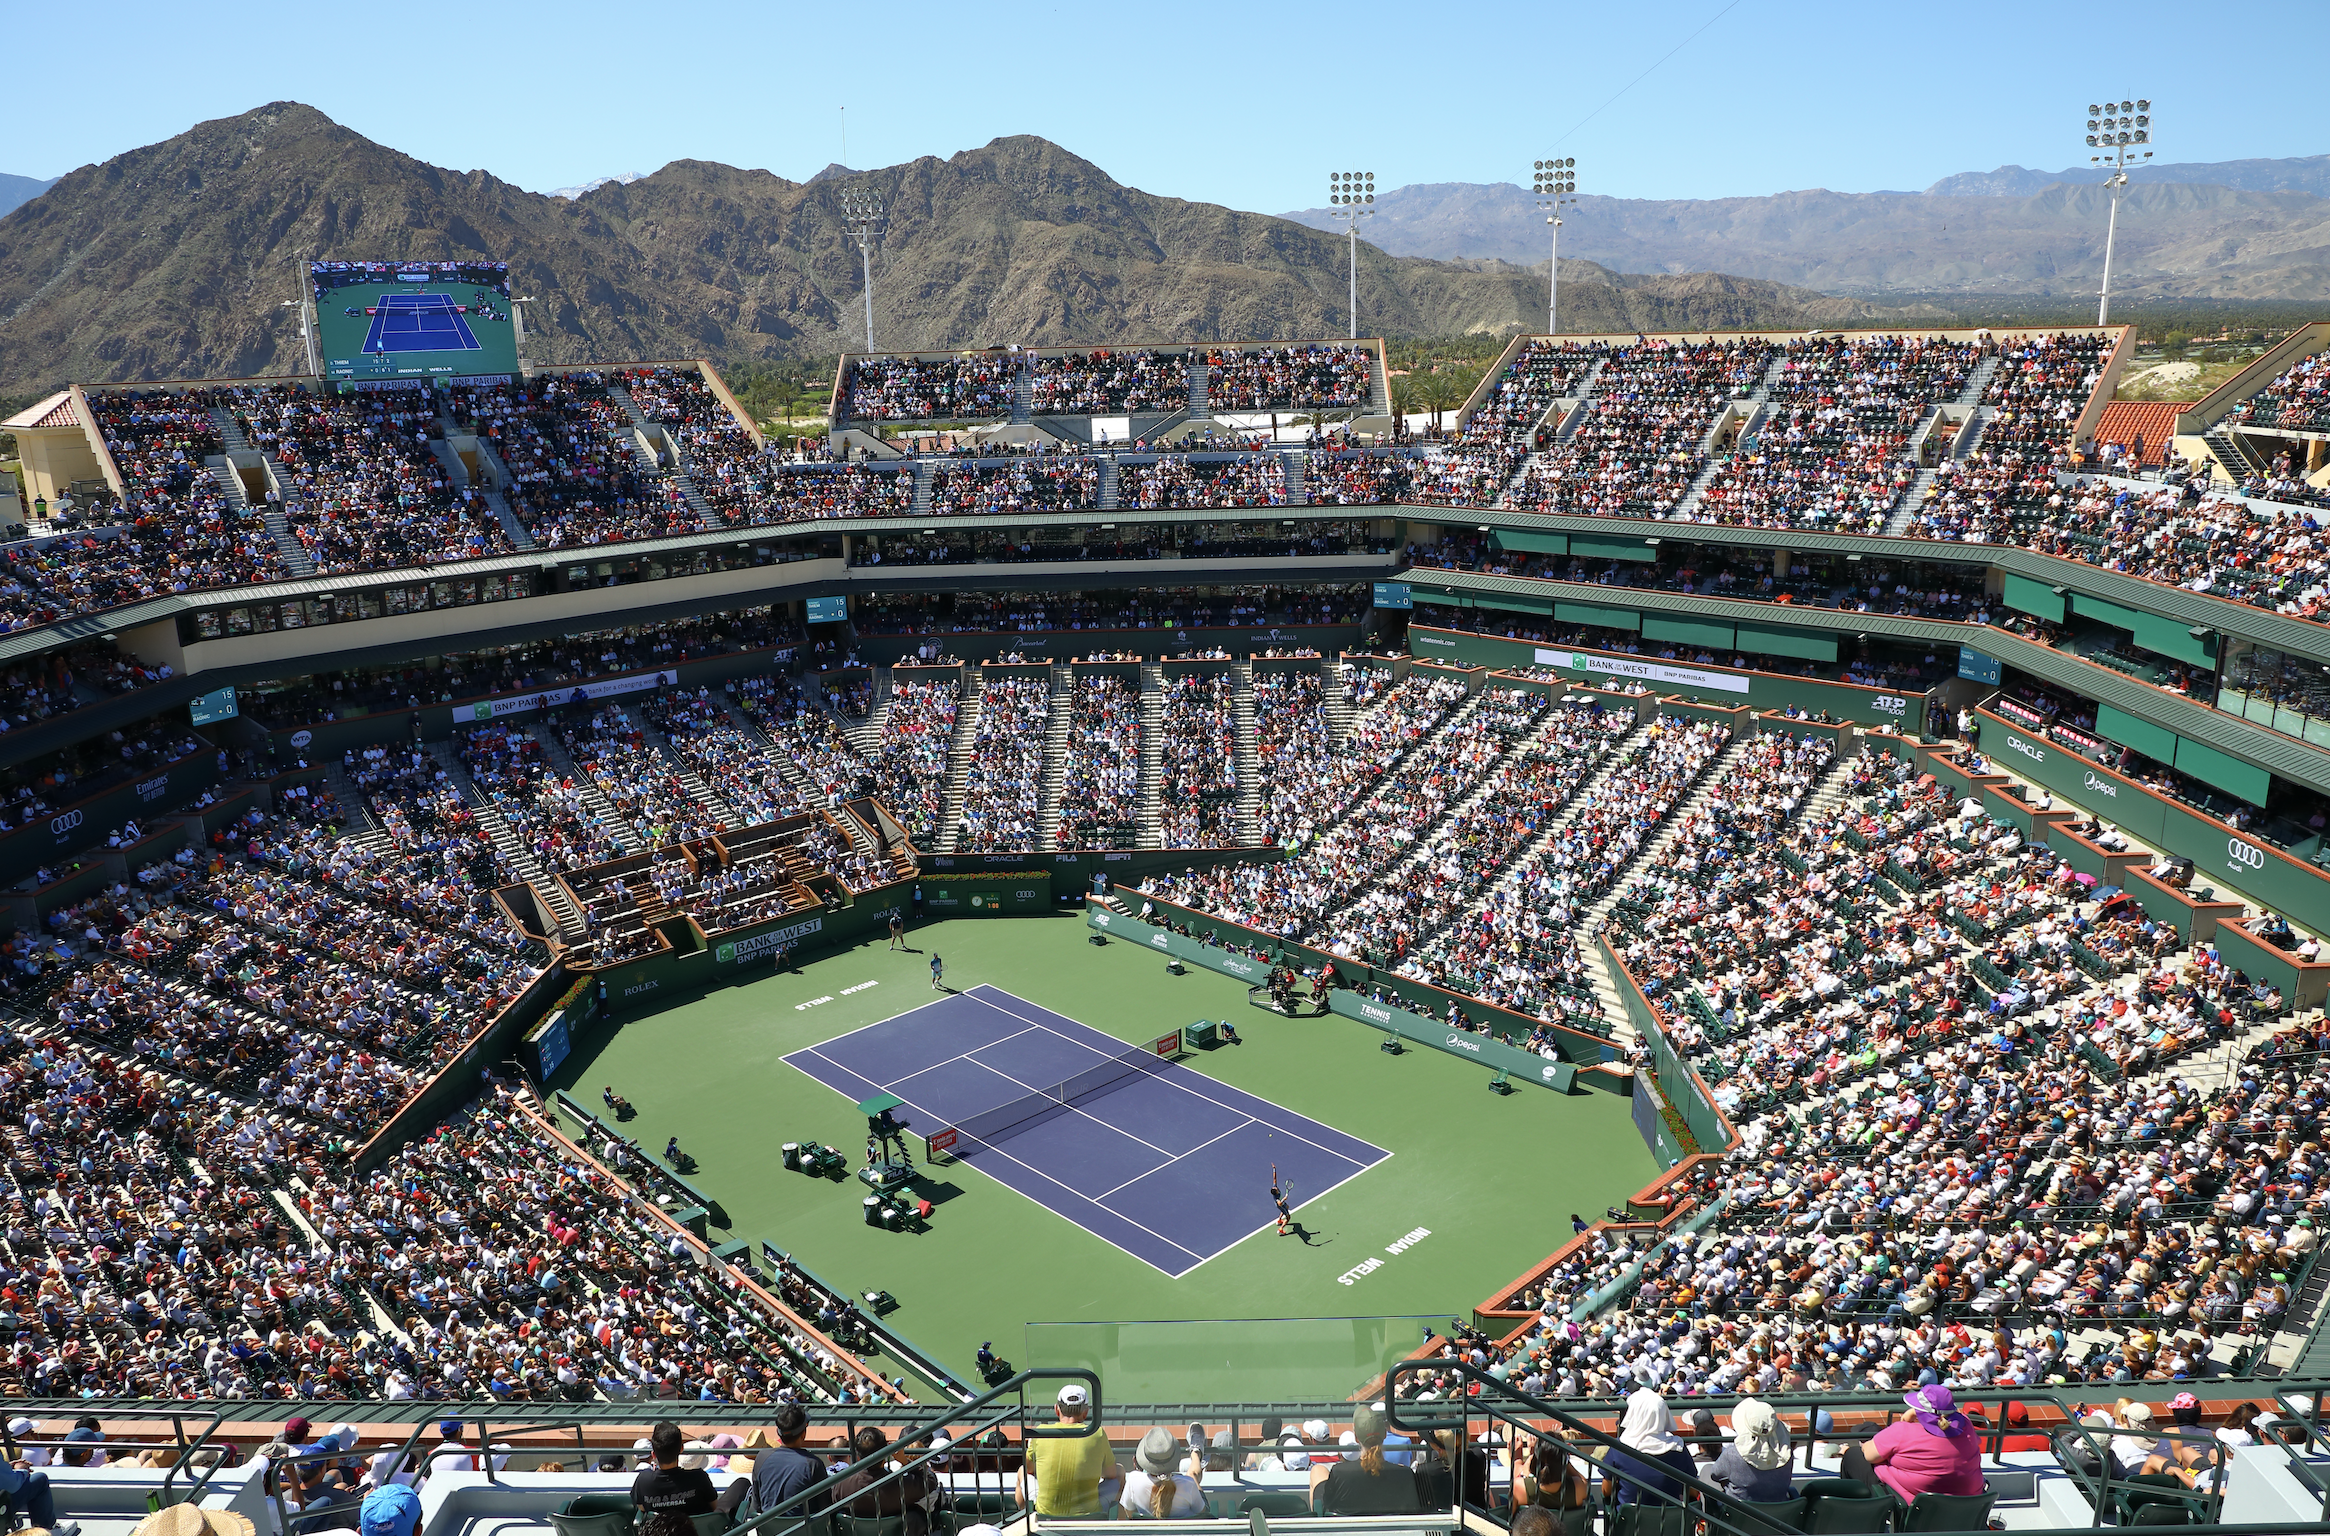 Sodexo Live! Named Hospitality Partner to the Indian Wells Tennis Garden, Home of the BNP Paribas Open